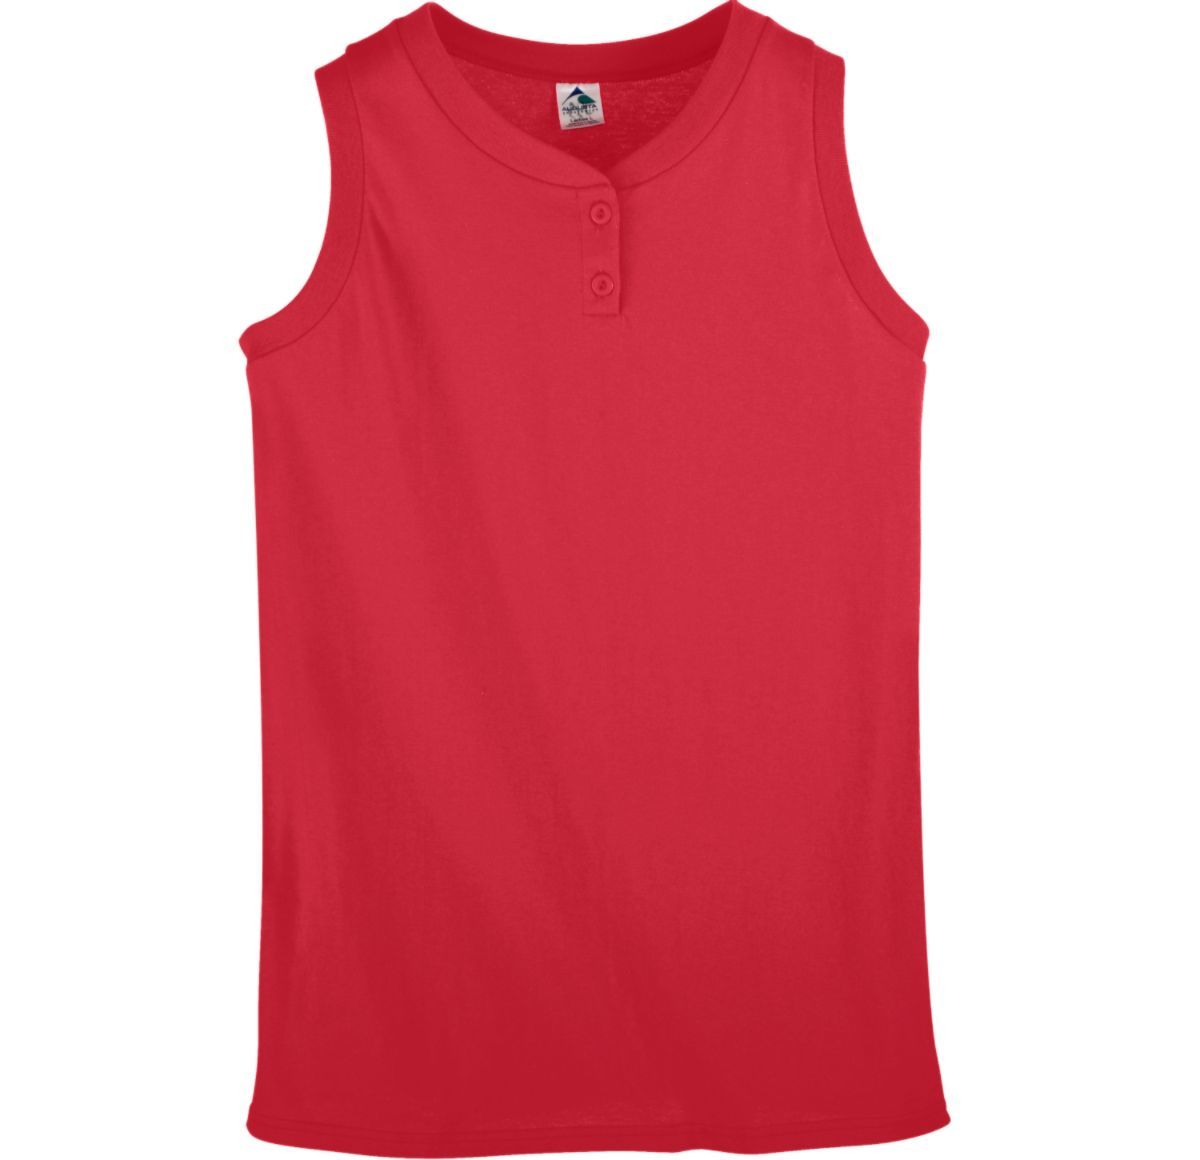 Augusta Sportswear Girls Sleeveless Two-Button Softball Jersey in Red  -Part of the Girls, Augusta-Products, Softball, Girls-Jersey, Shirts product lines at KanaleyCreations.com